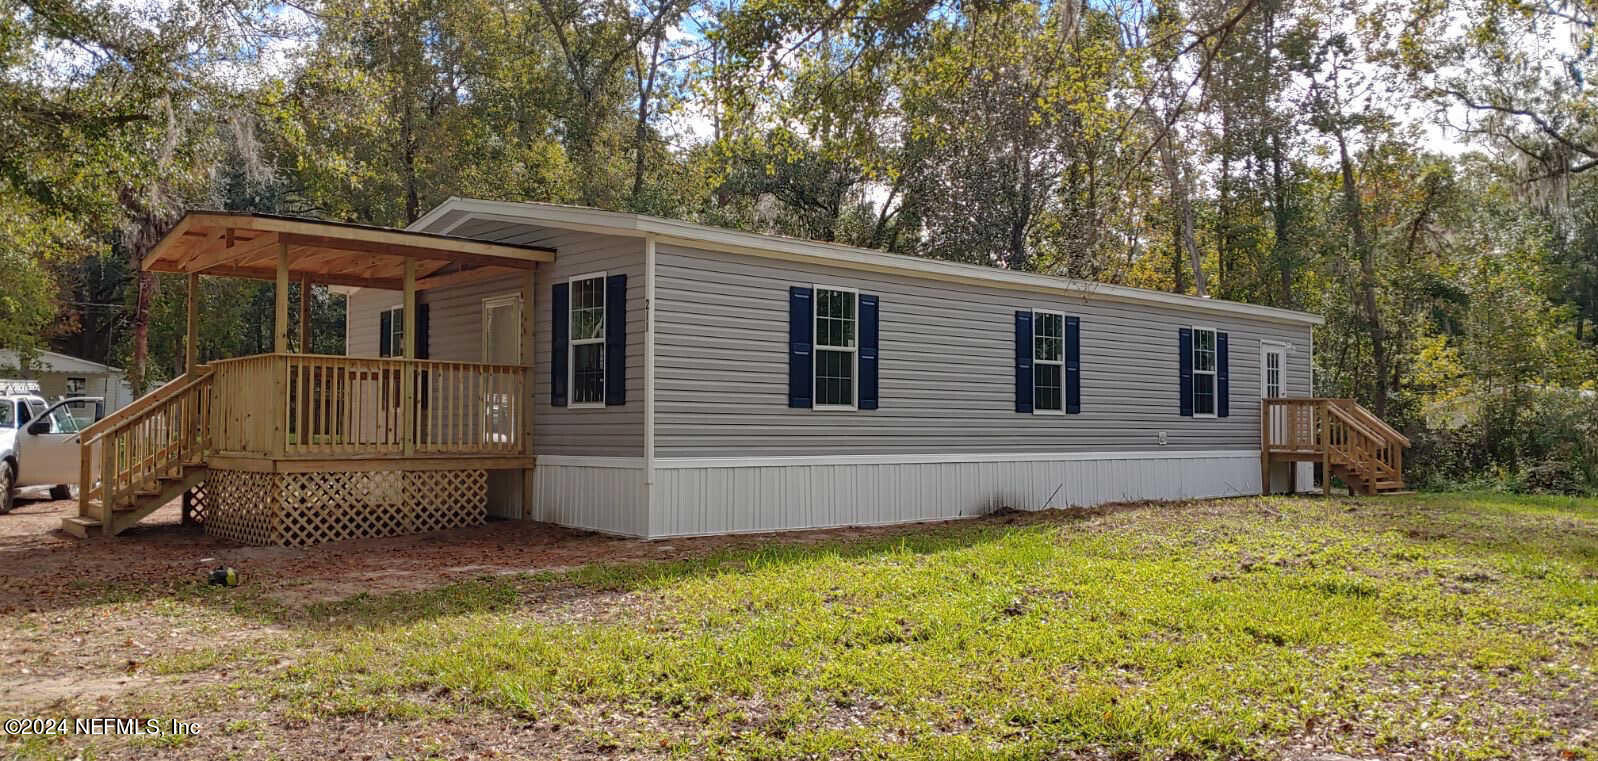 Middleburg, FL home for sale located at 211 Knight Boxx Road, Middleburg, FL 32068